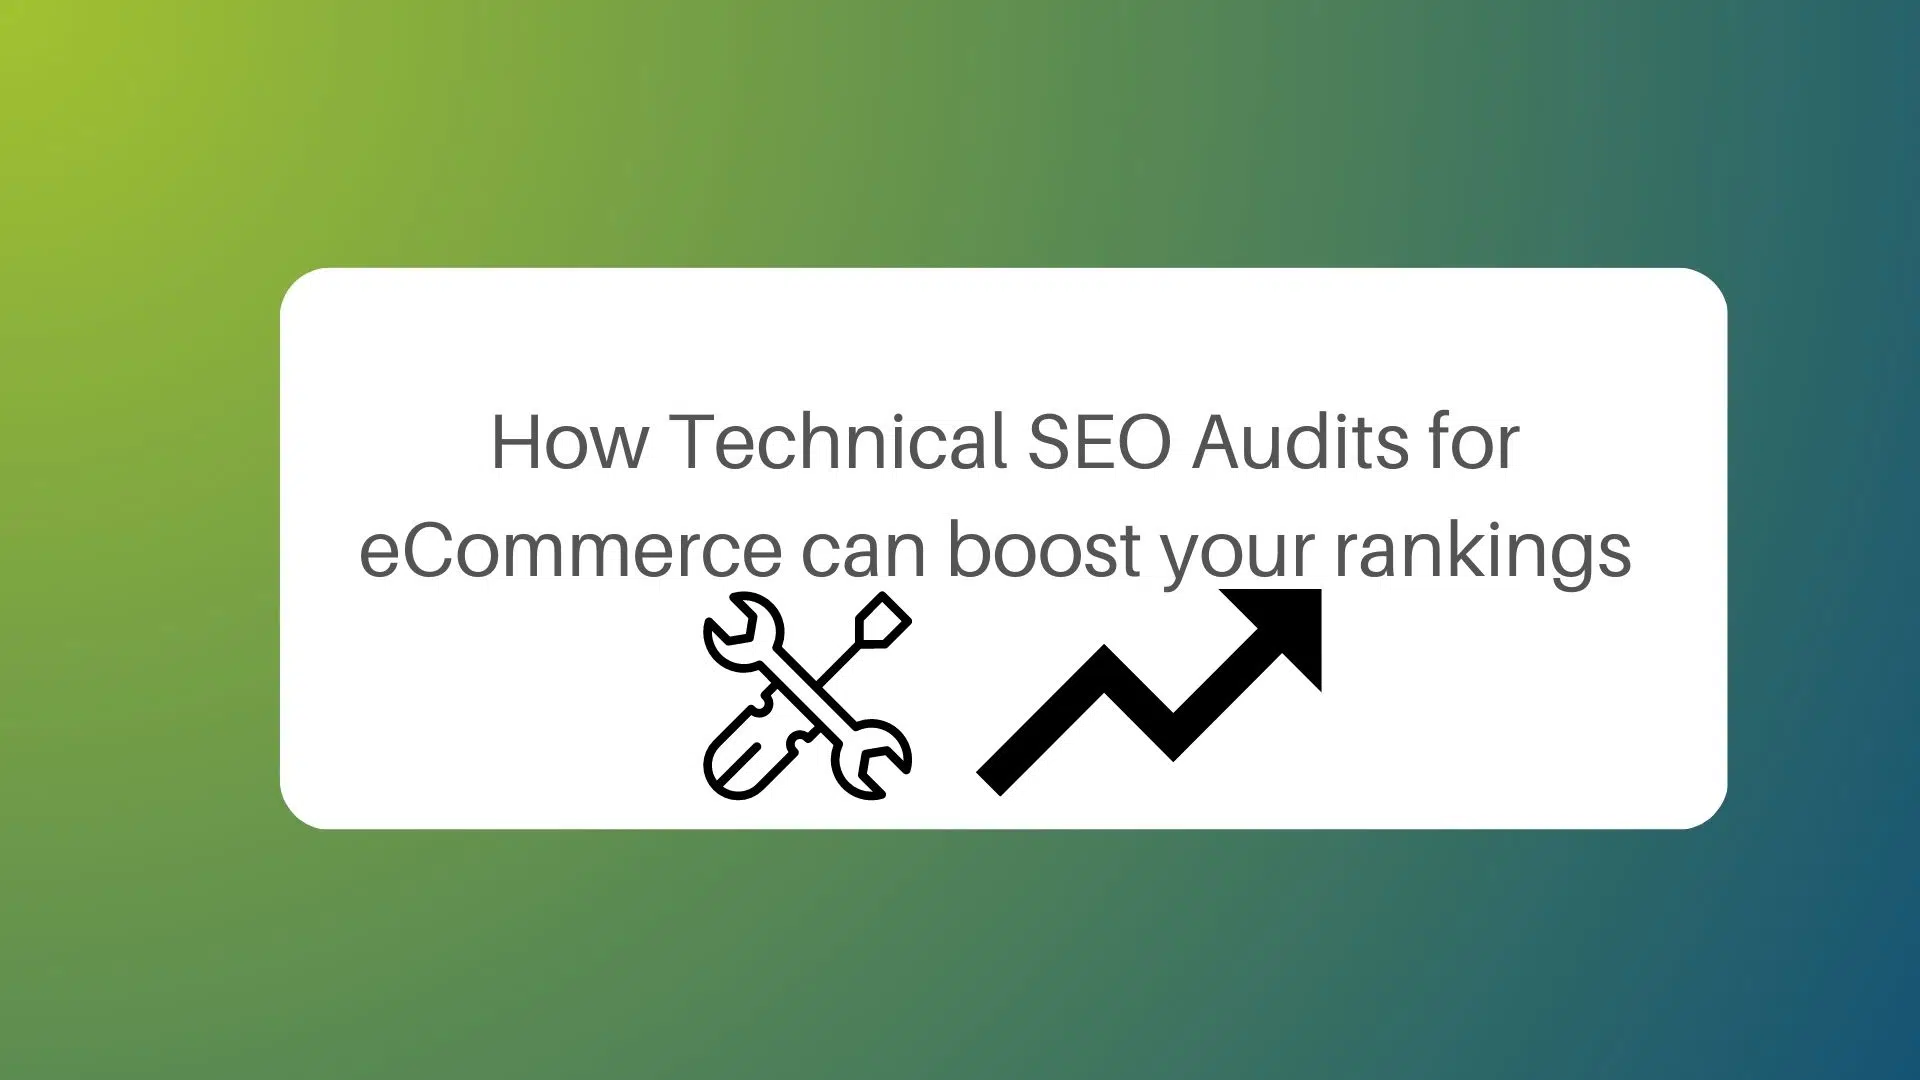 How Technical SEO Audits for eCommerce can boost your rankings